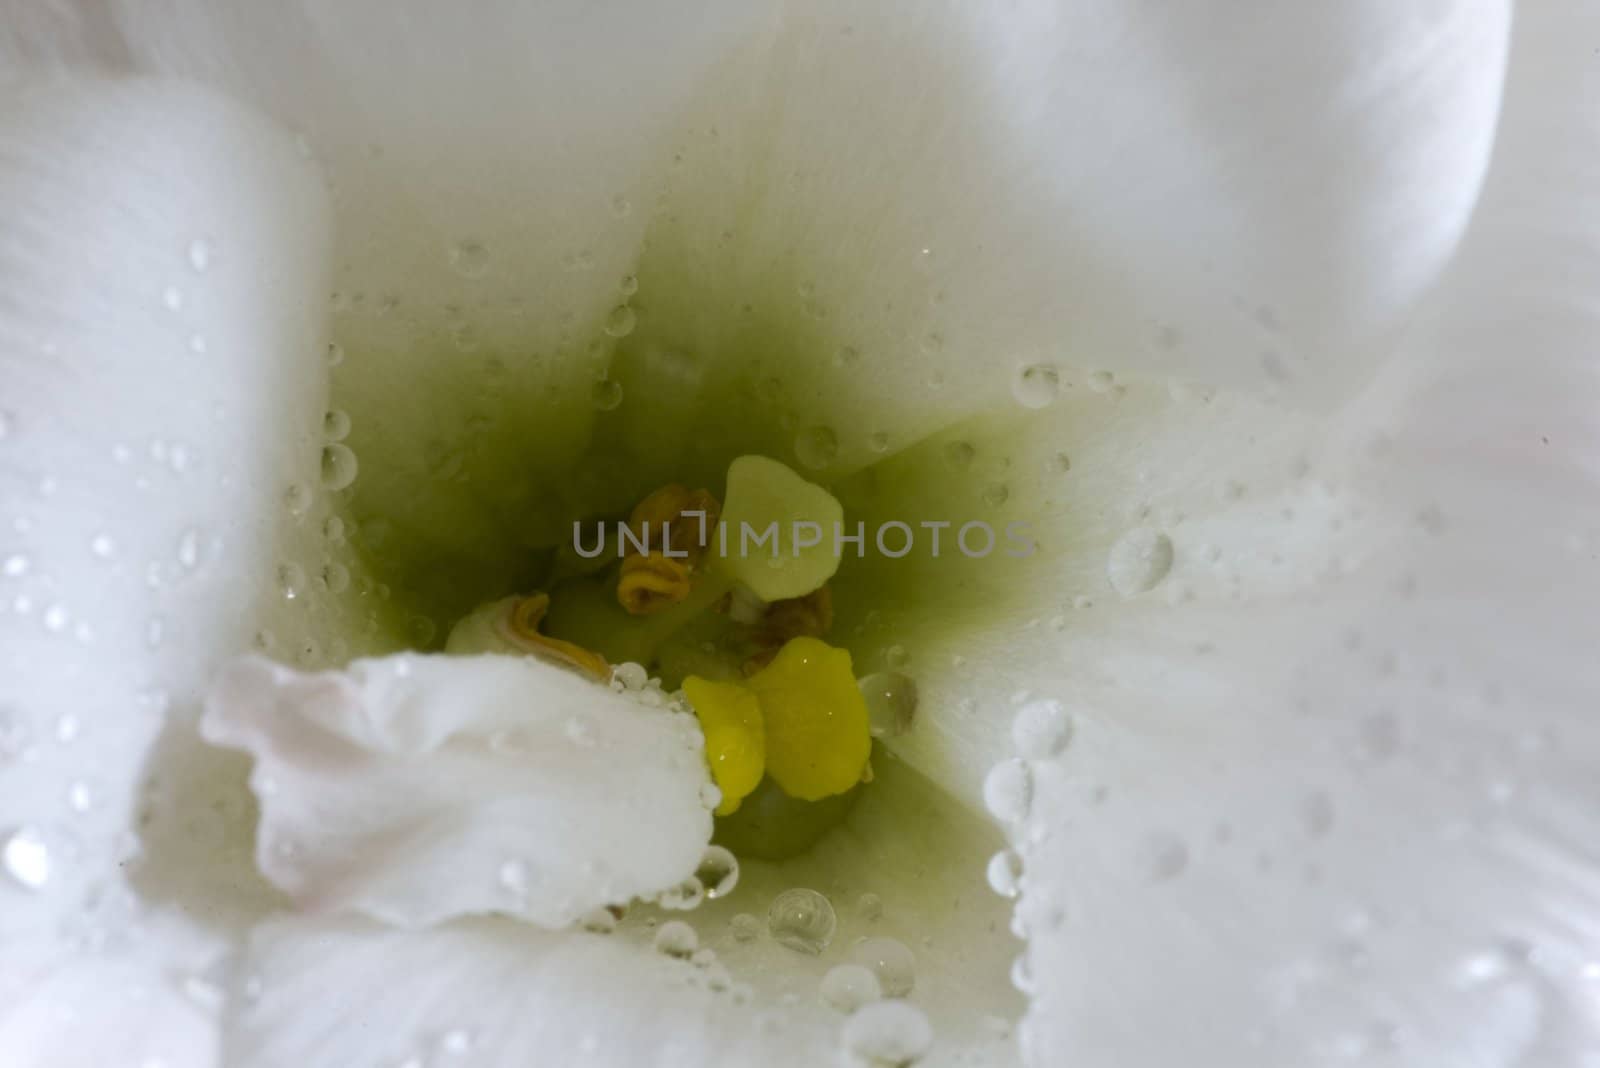 On a photo a white rose by macro lens